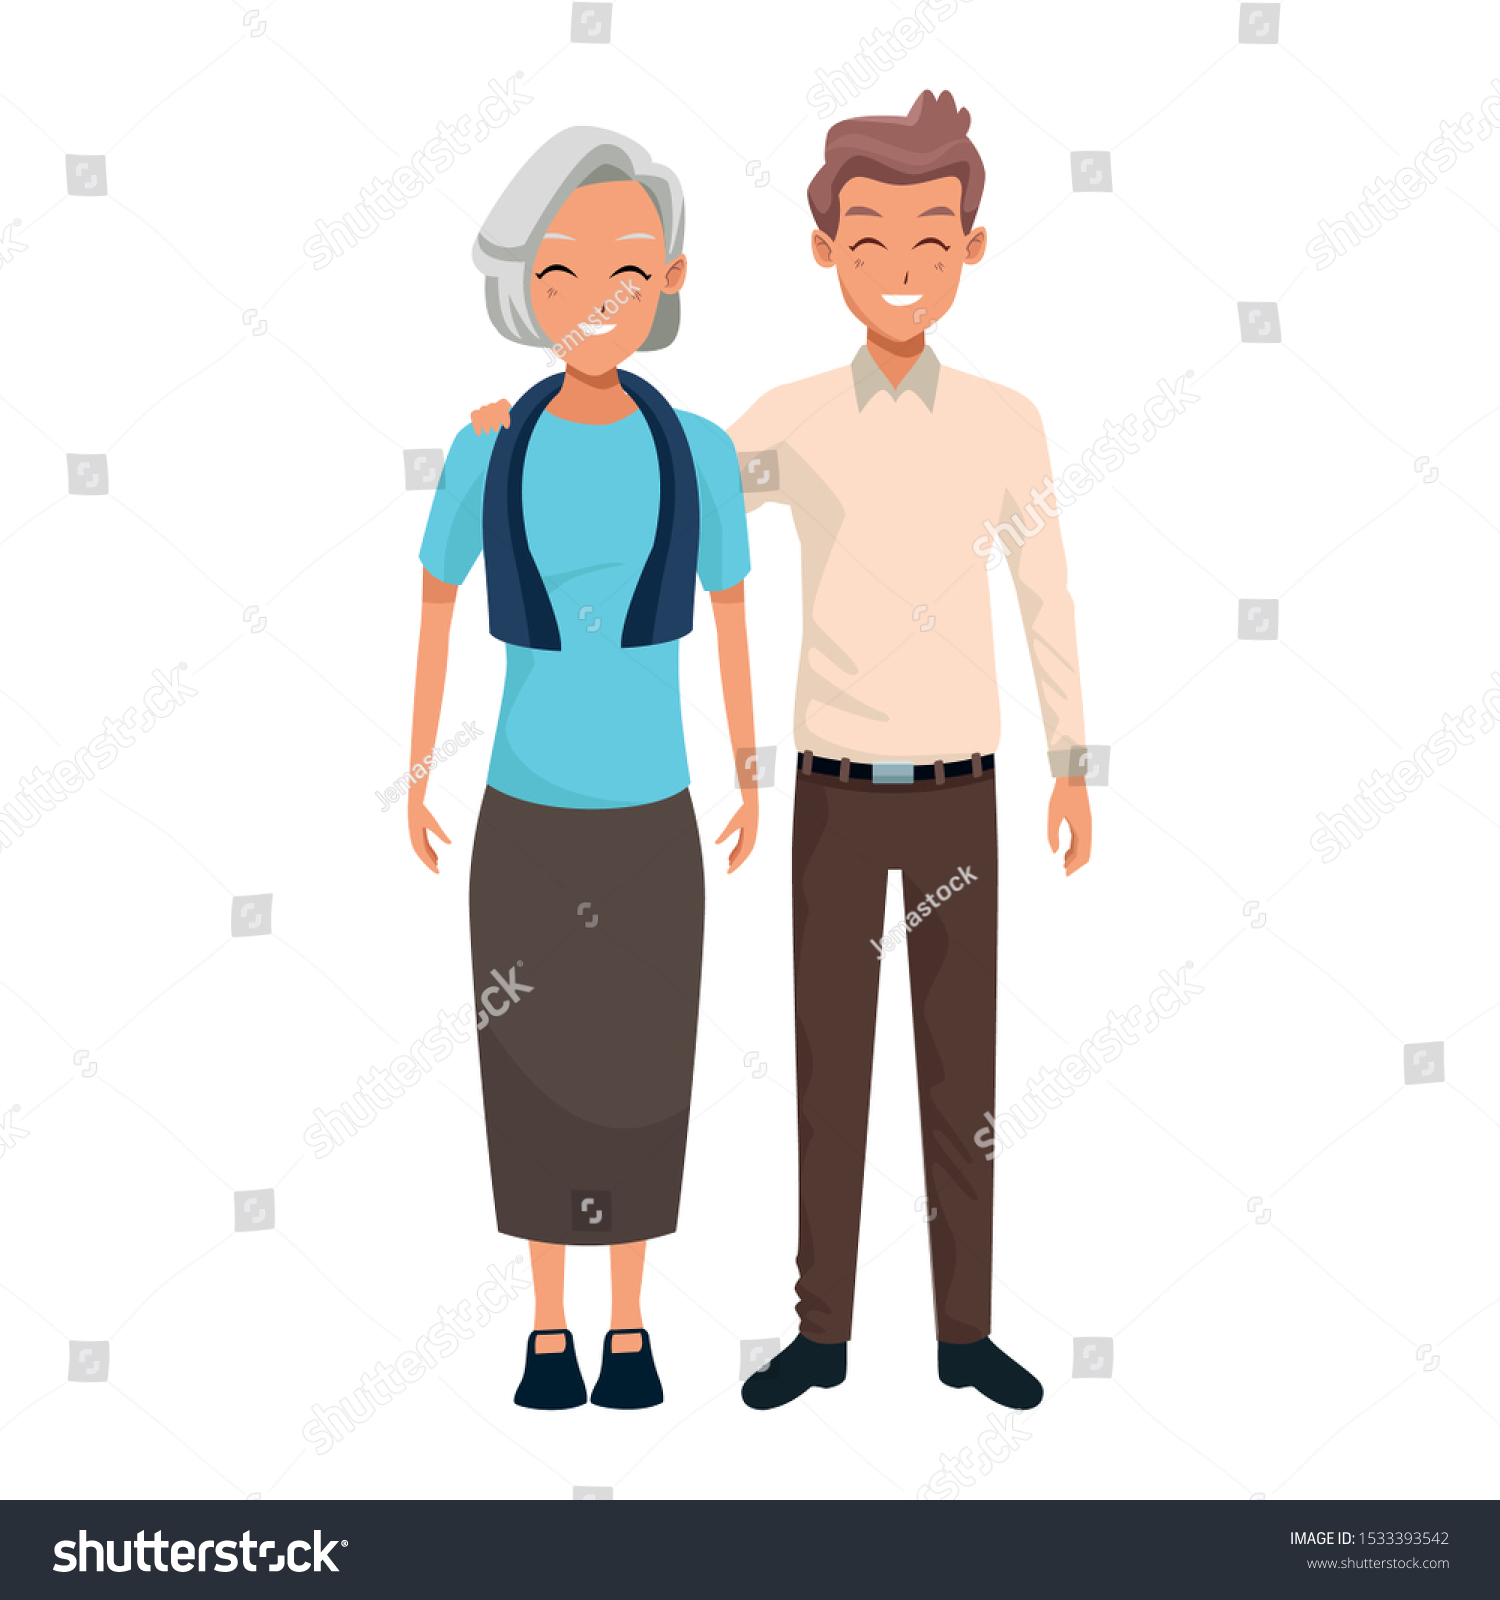 SVG of happy old woman and man together over white background, vector illustration svg